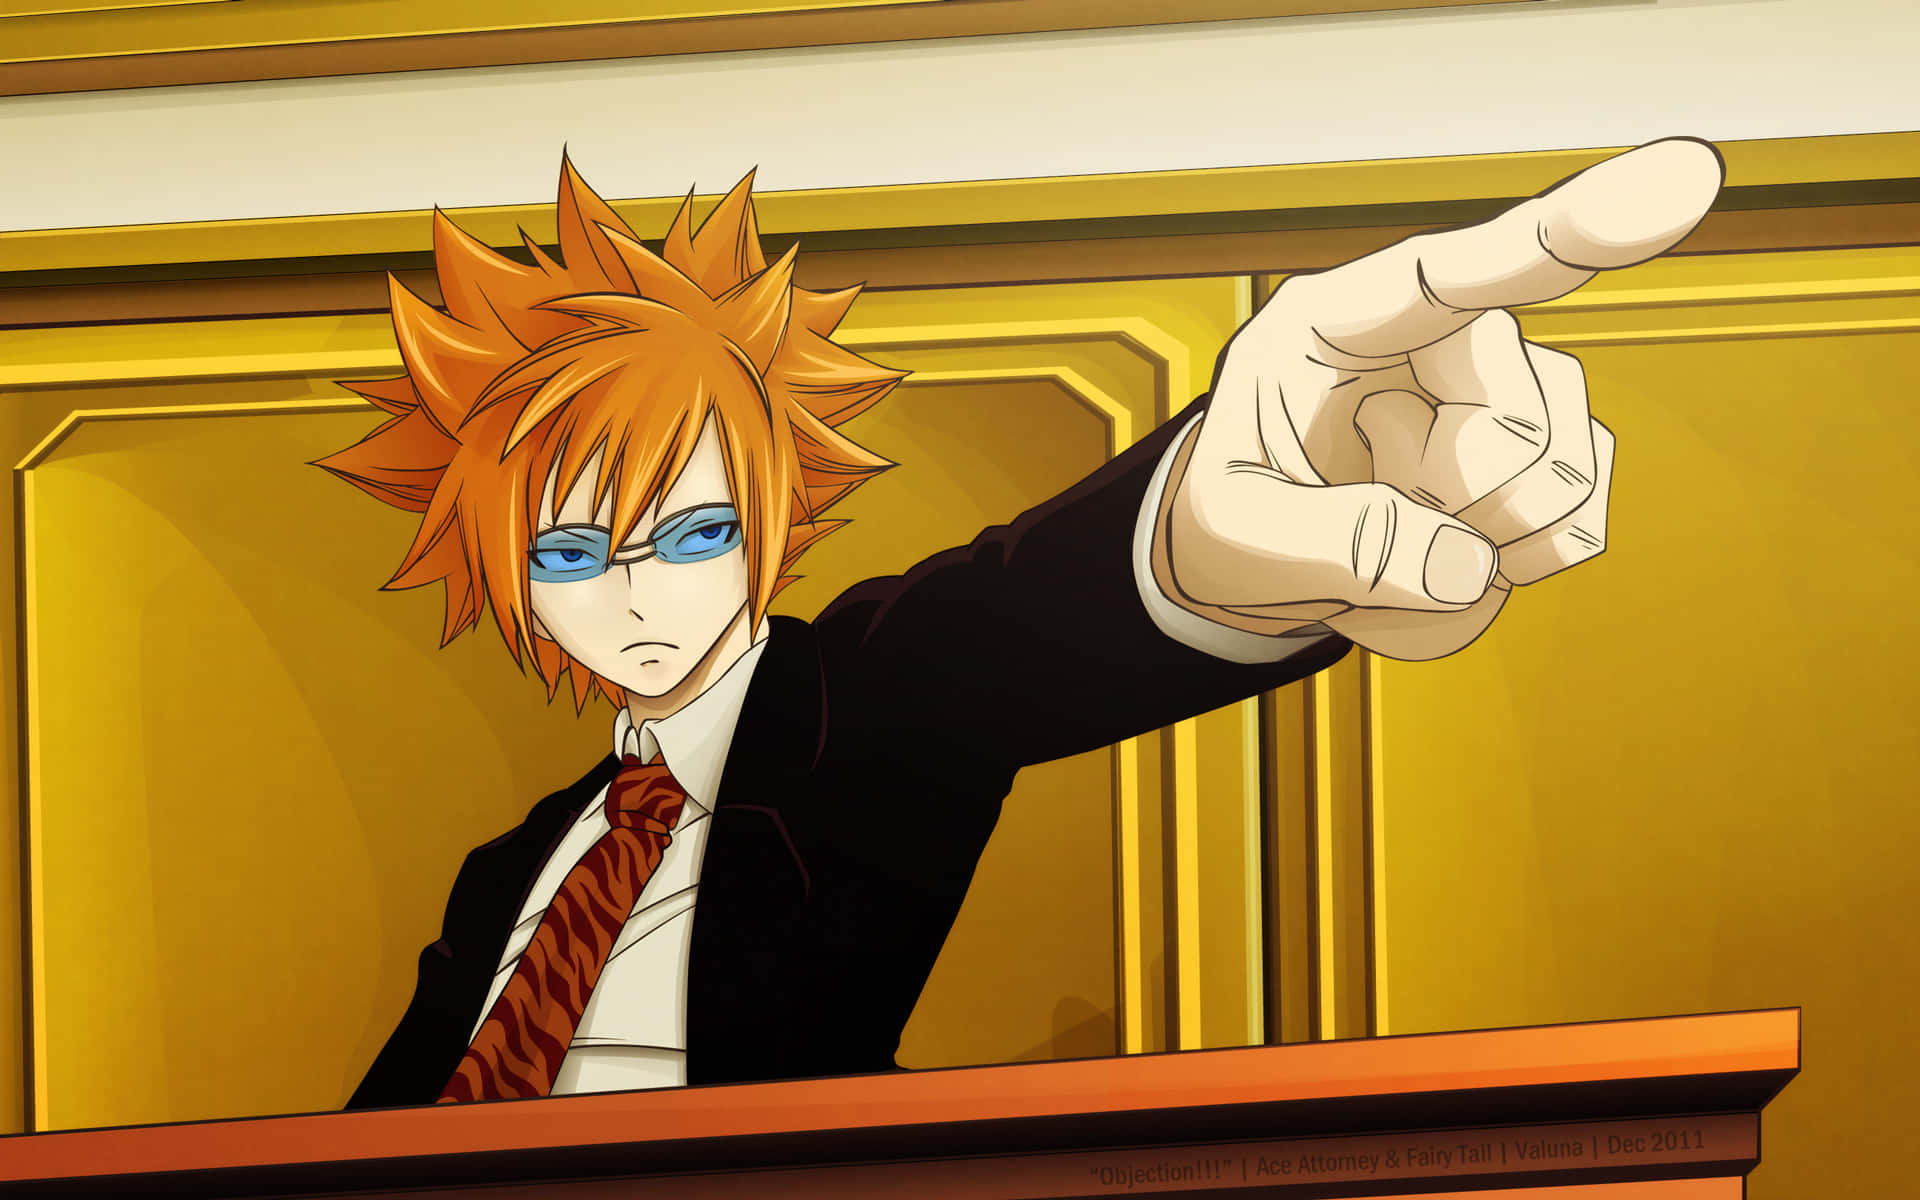 Animated Lawyer Pointing Objection Wallpaper